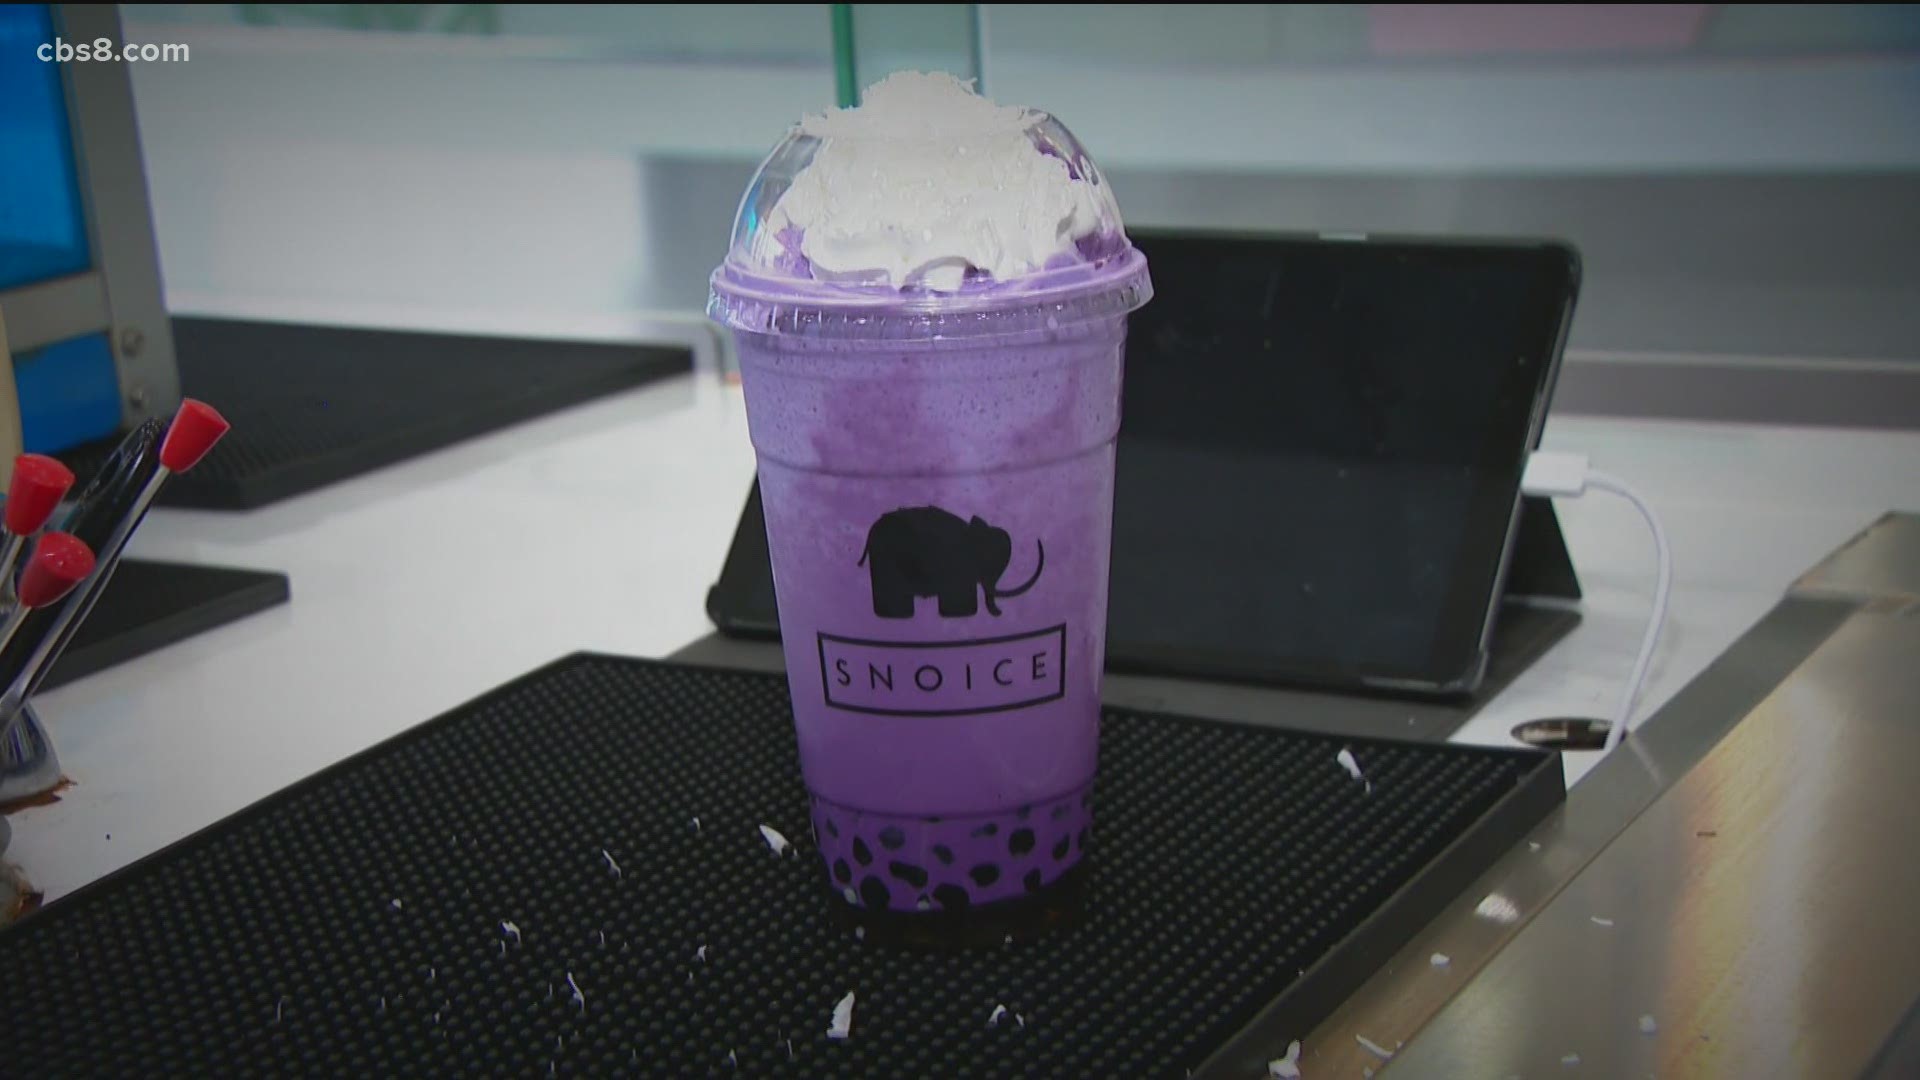 Snoice serves up shaved snow and ice desserts with an assortment of boba teas.